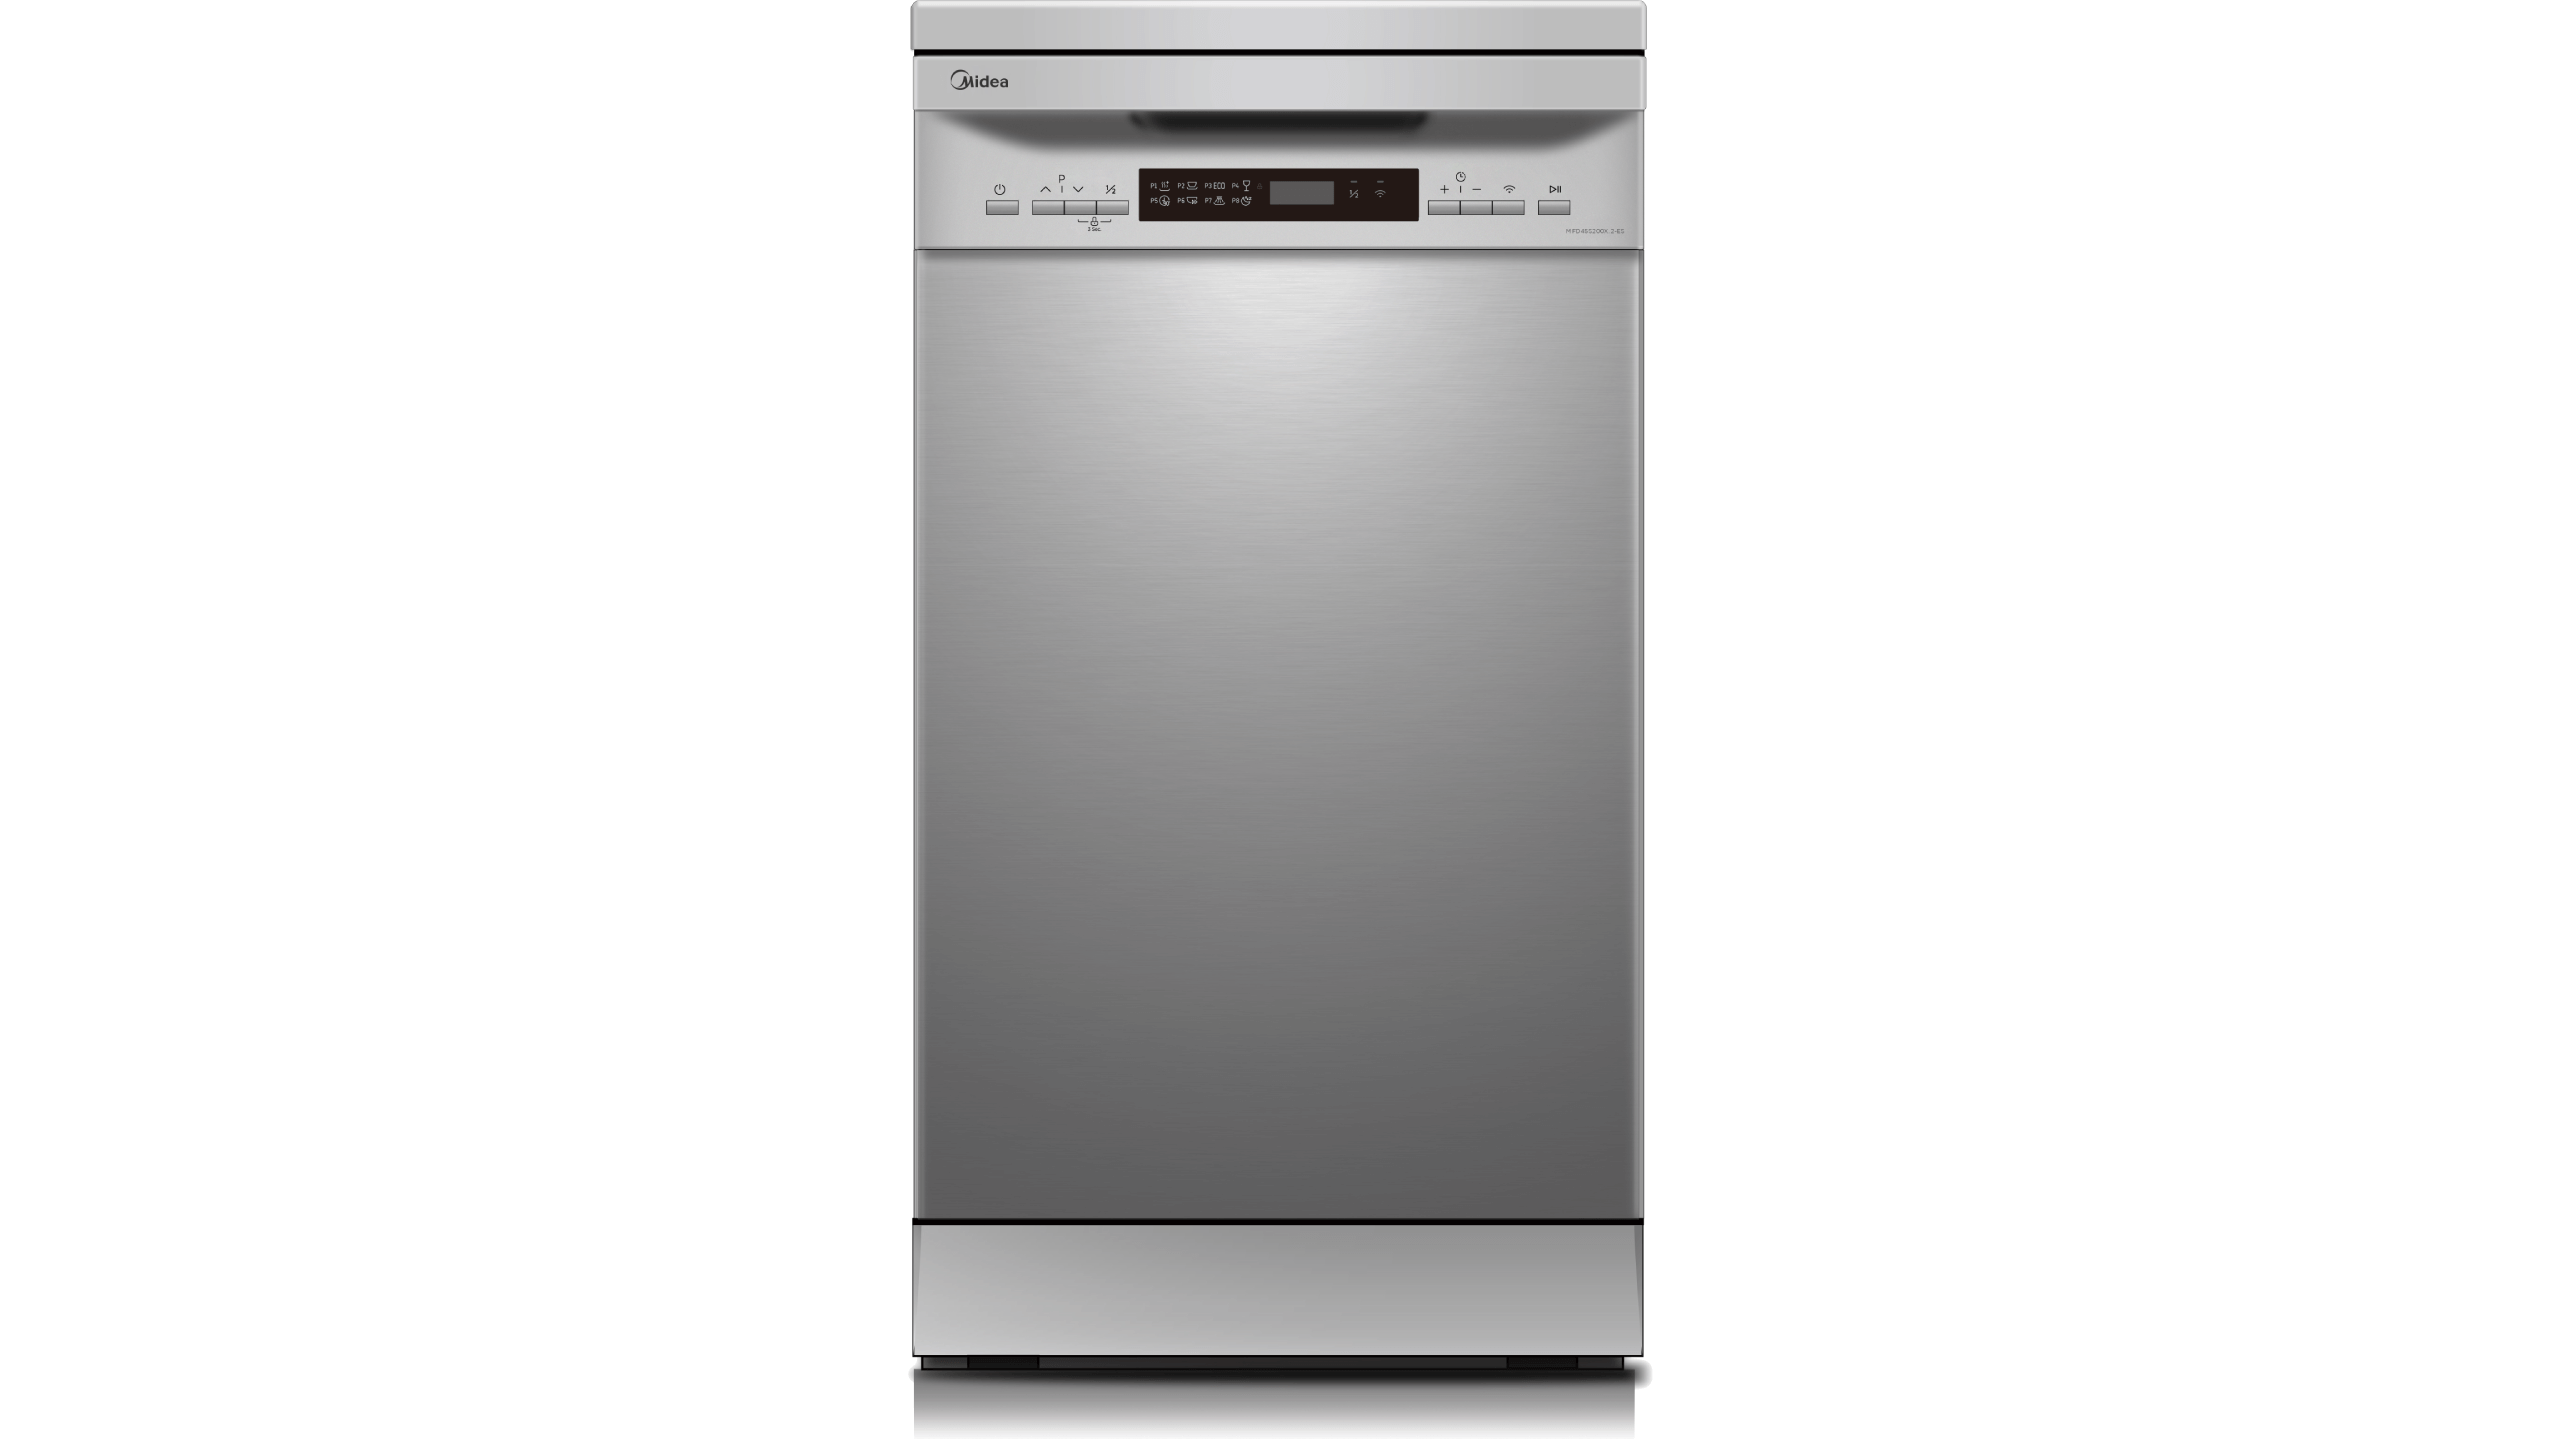 Midea Dishwasher Free Standing 45cm INOX With Wi-Fi Connectivity (MFD45S200X)